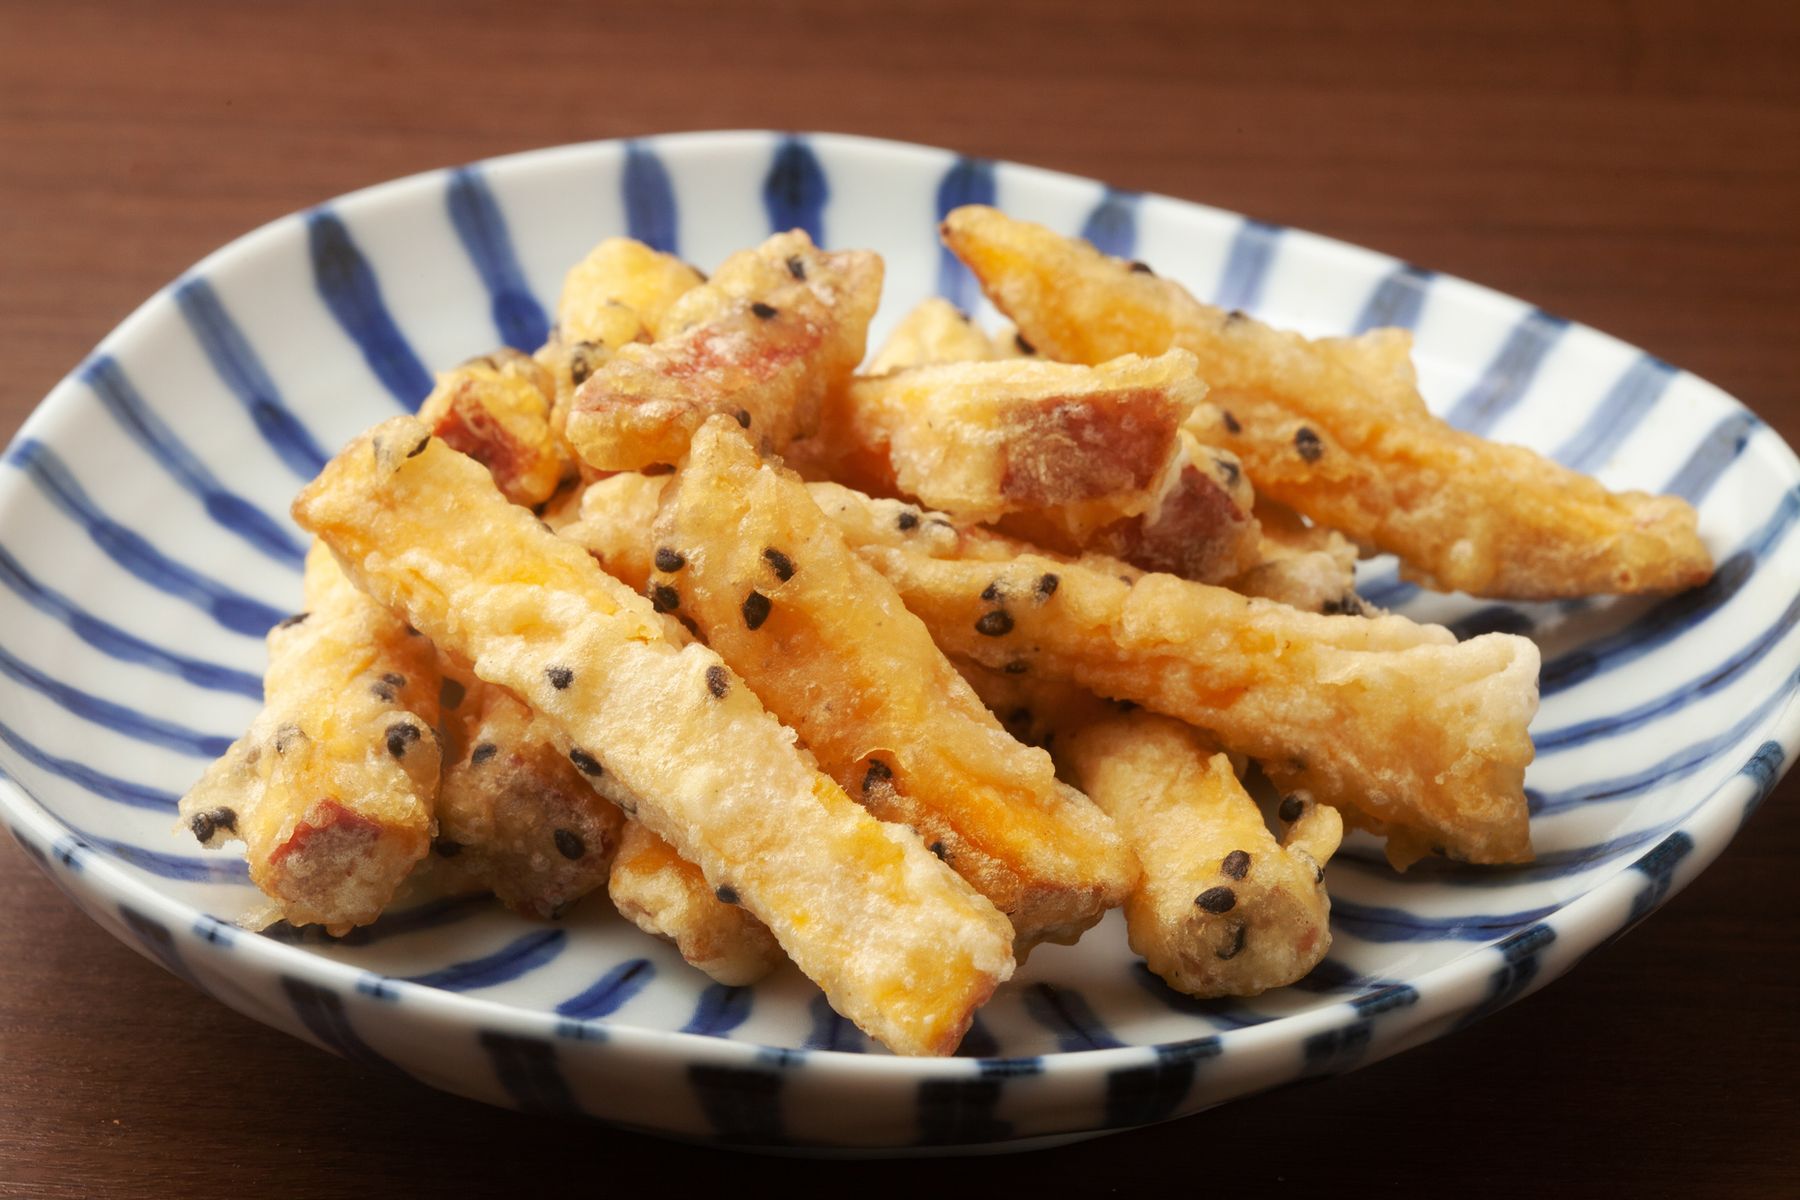 <p>Shrimp aren’t the only food that goes great with a crispy tempura coating. Add <a href="https://thissillygirlskitchen.com/coconut-tempura-sweet-potato-fries-with-curry-aioli/">coconut flakes</a> to your tempura recipe for a surprising twist!</p>